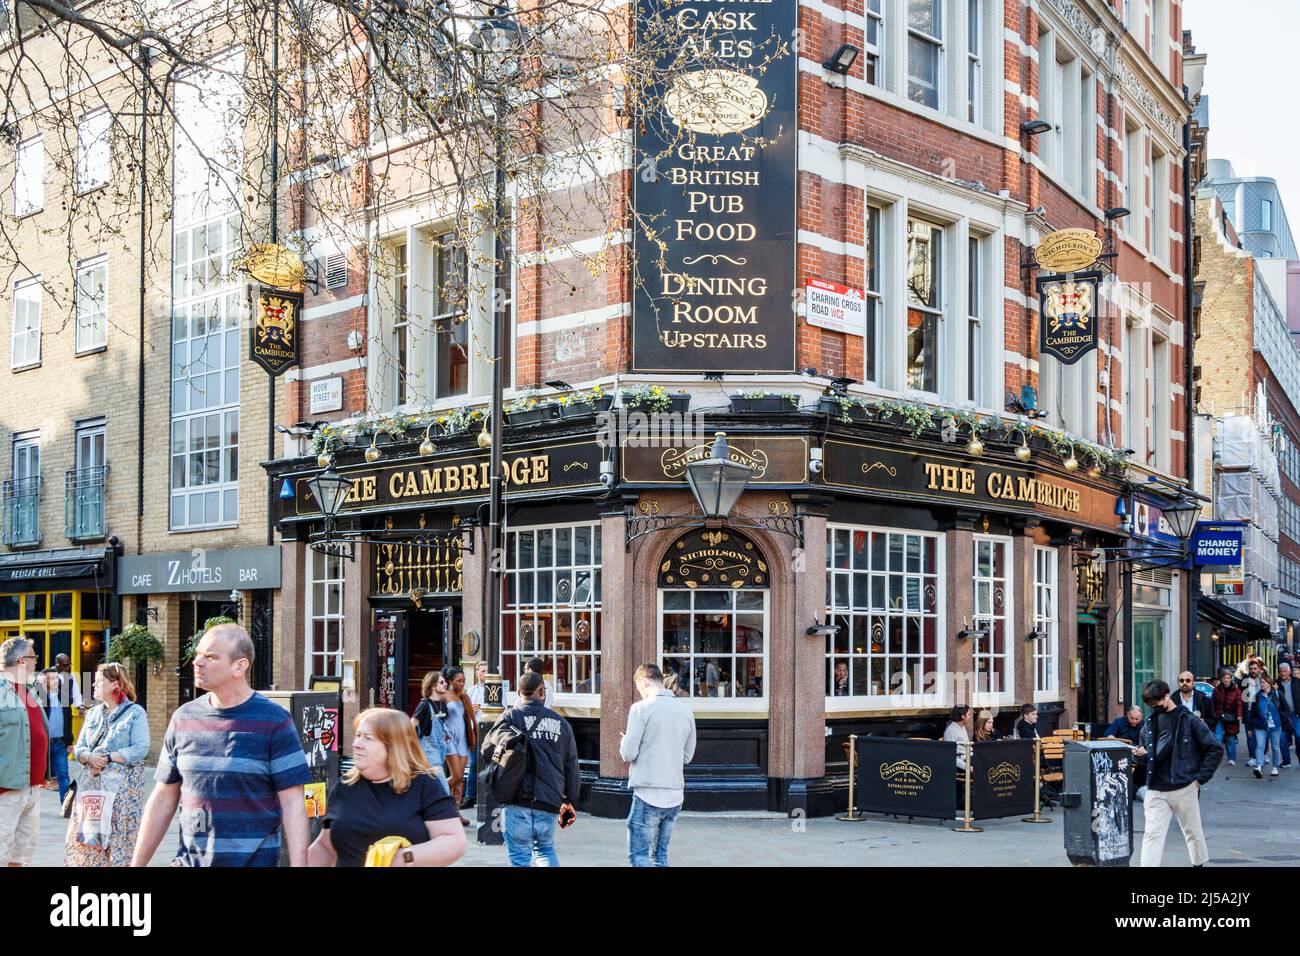 The Cambridge, a public house in Cambridge Circus on the corner of Moor Street and Charing Cross Road, London, UK Stock Photo